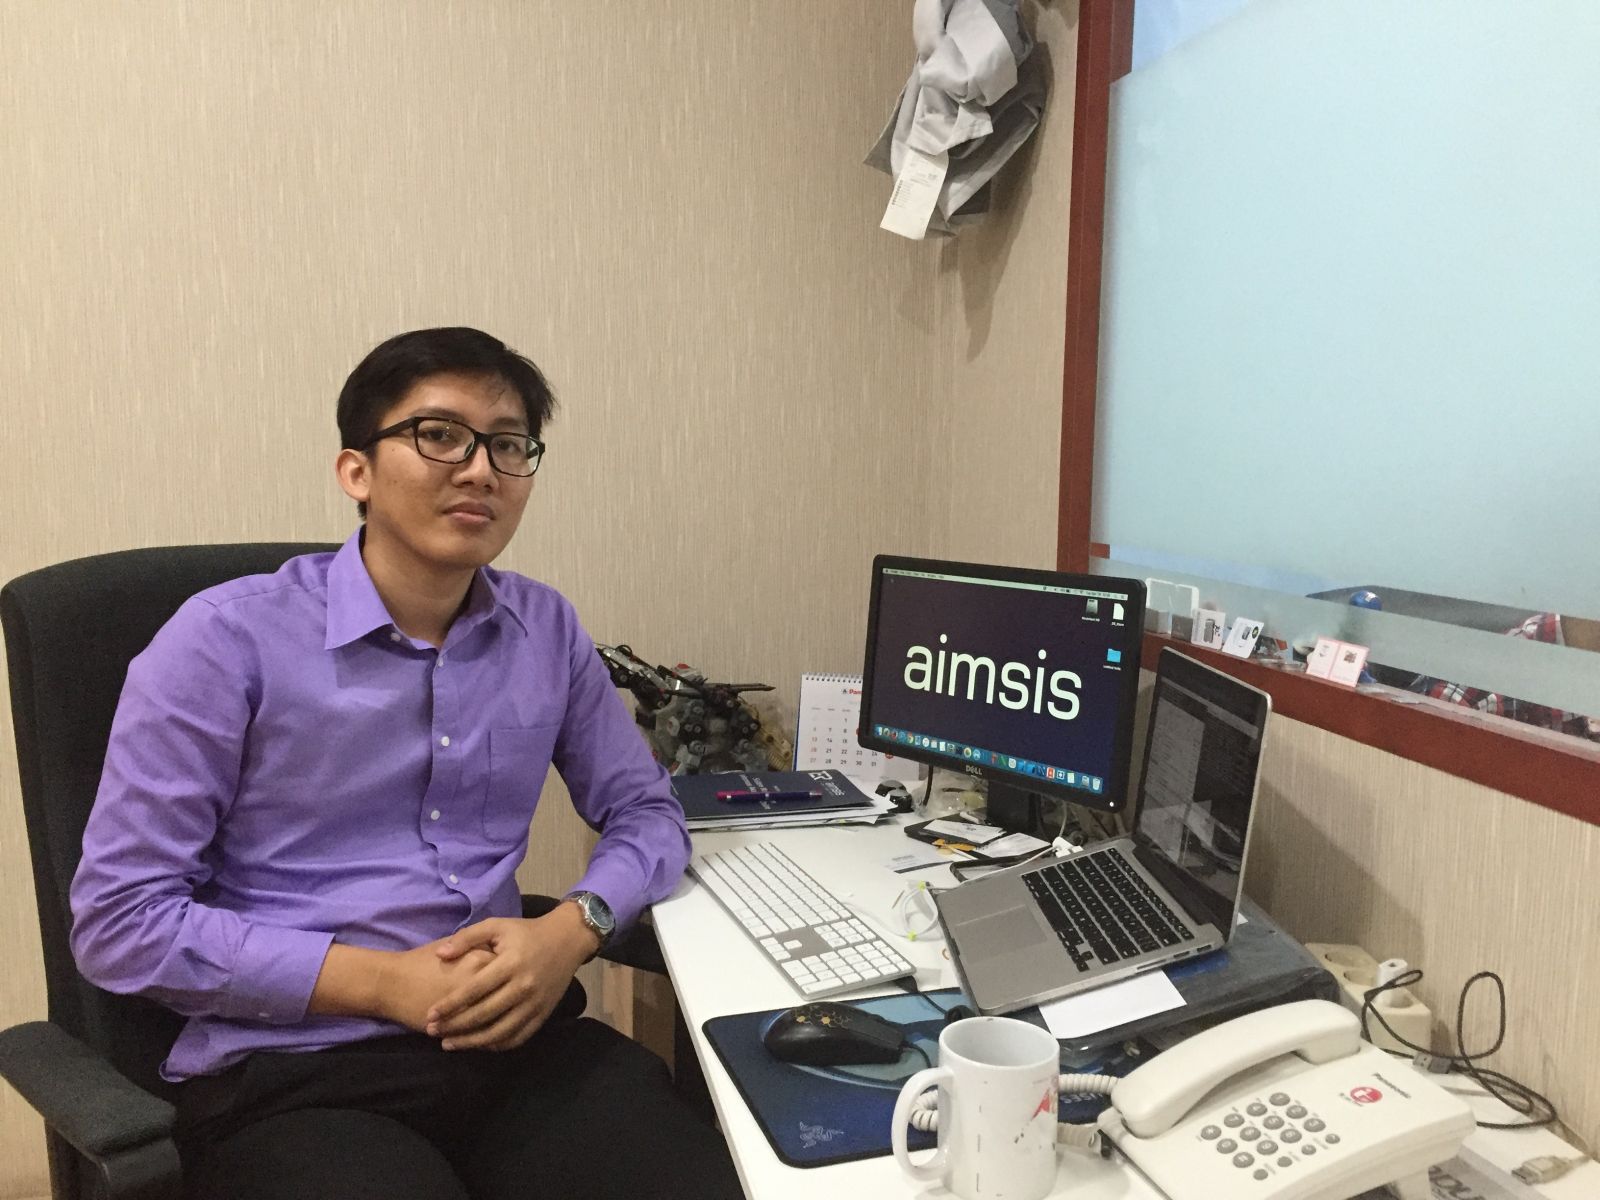 Aimsis aims to push digitalisation in schools